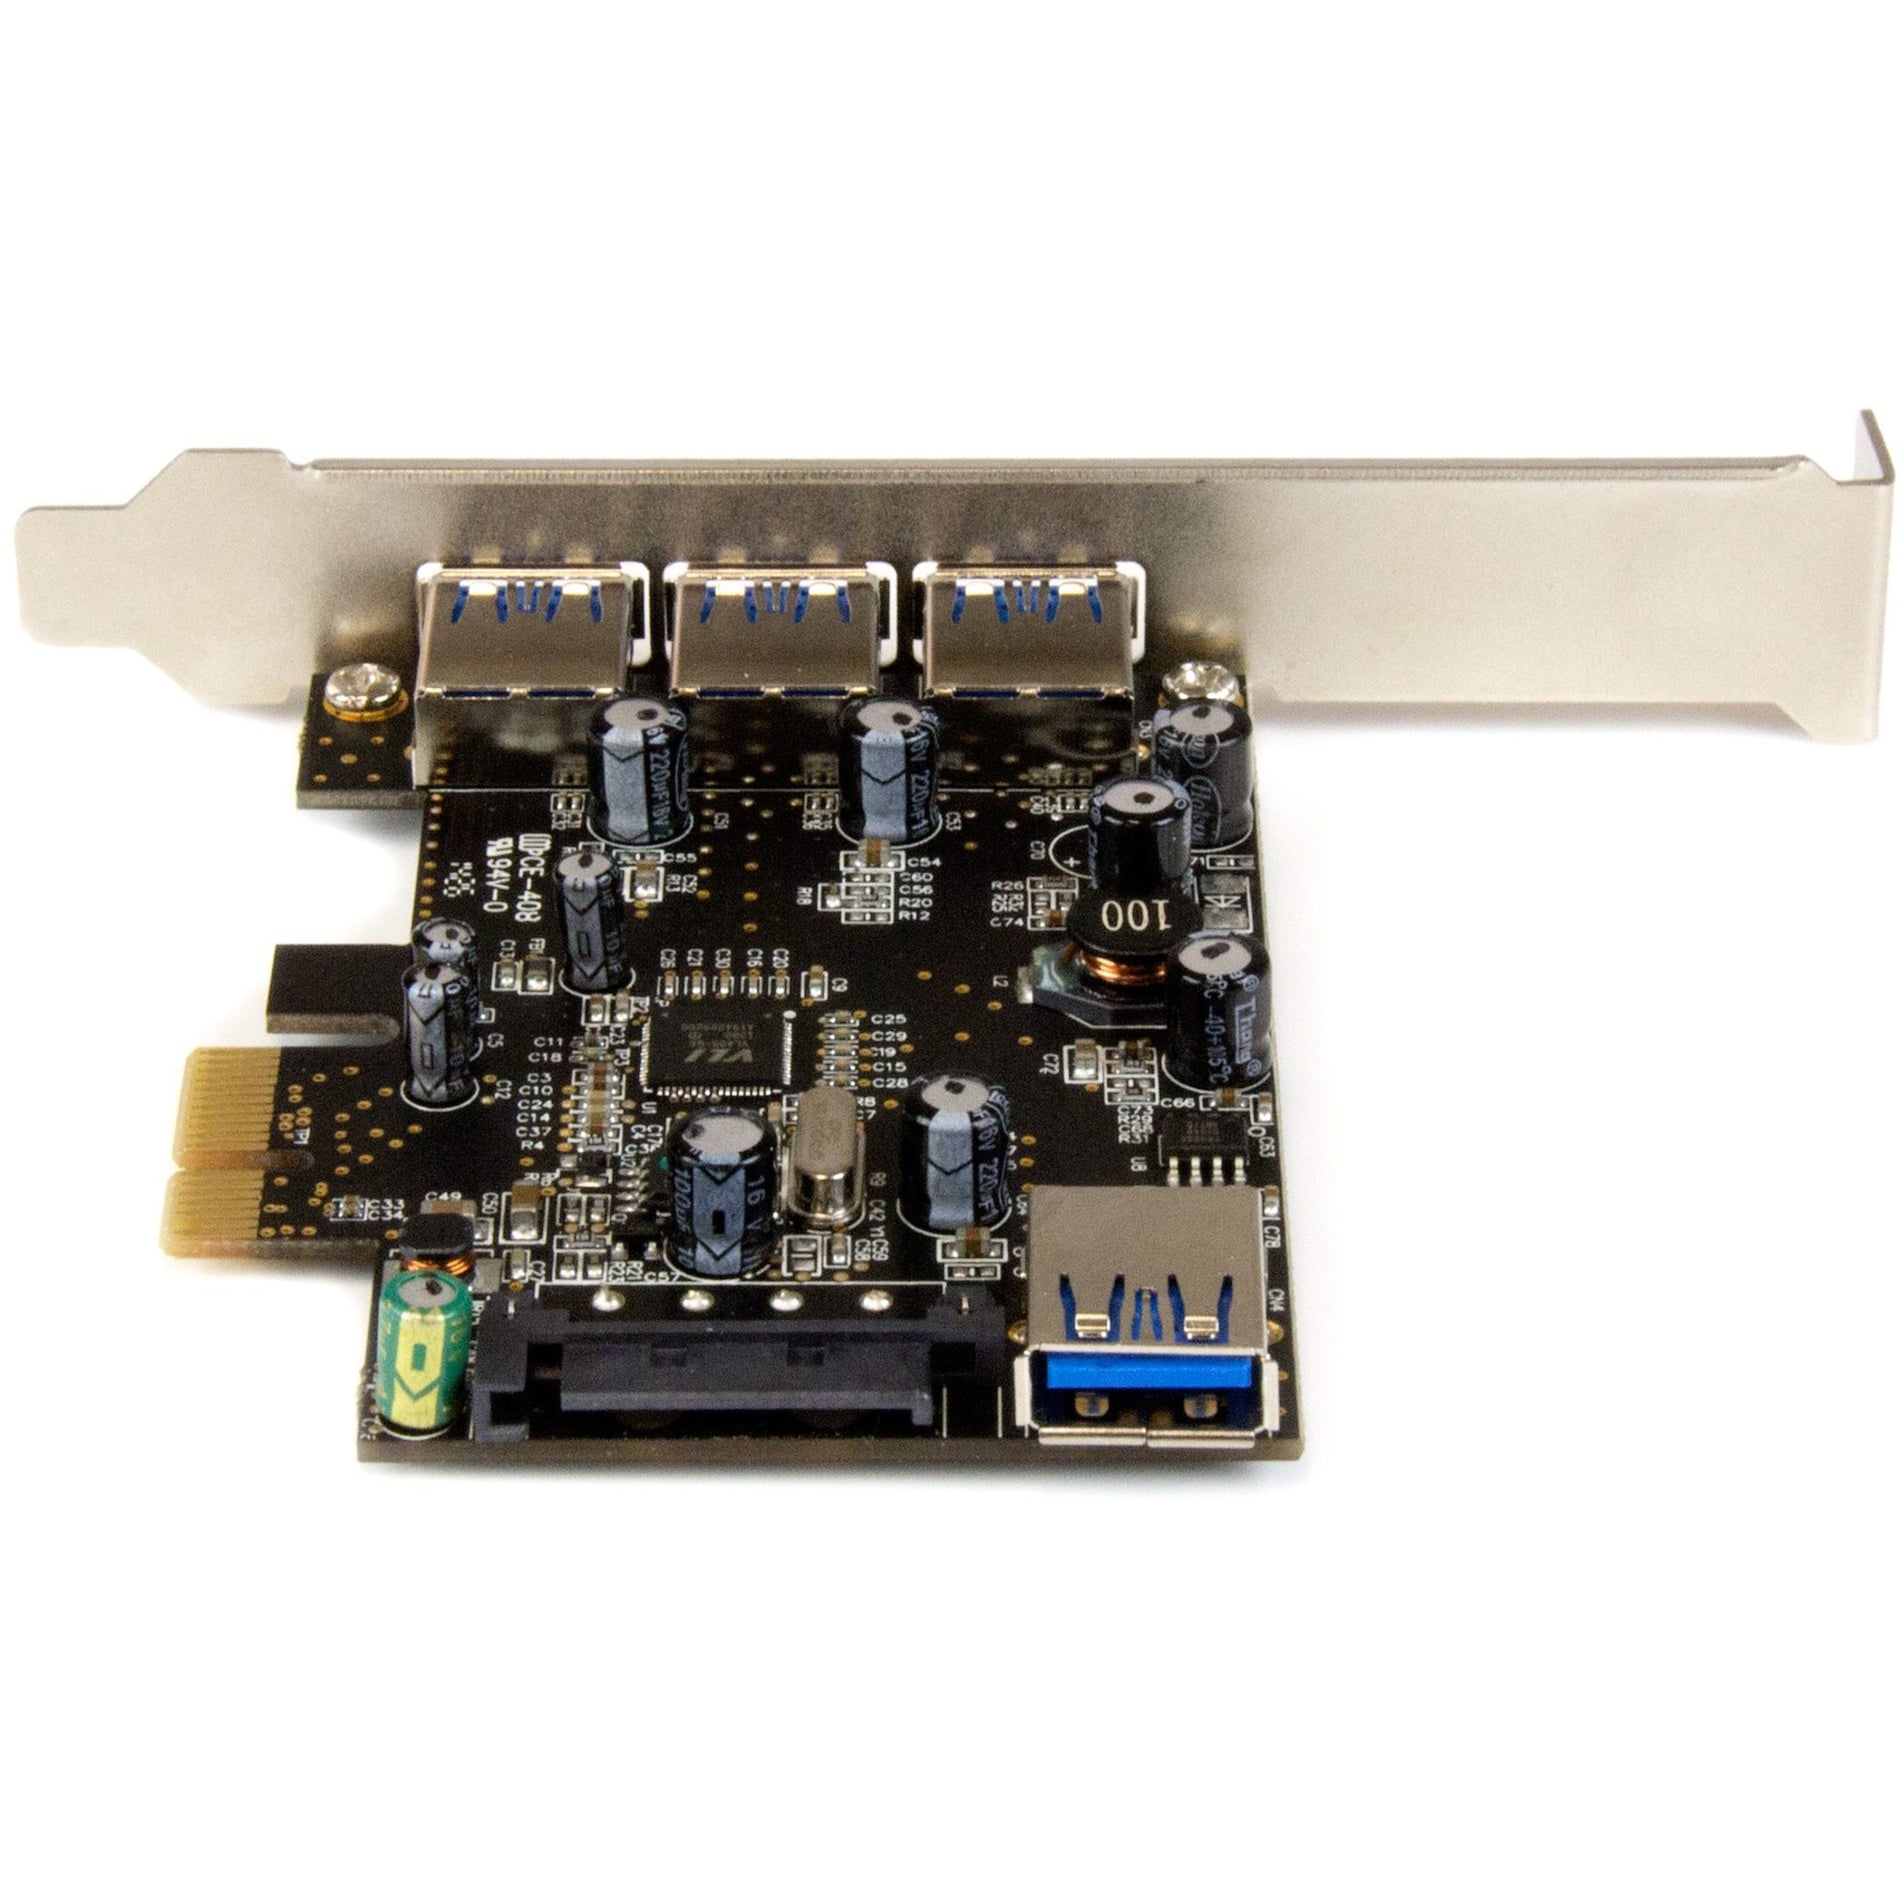 StarTech.com PEXUSB3S42 4-Port PCI Express USB 3.0 Card - 5Gbps, Add High-Speed USB Connectivity to Your PC